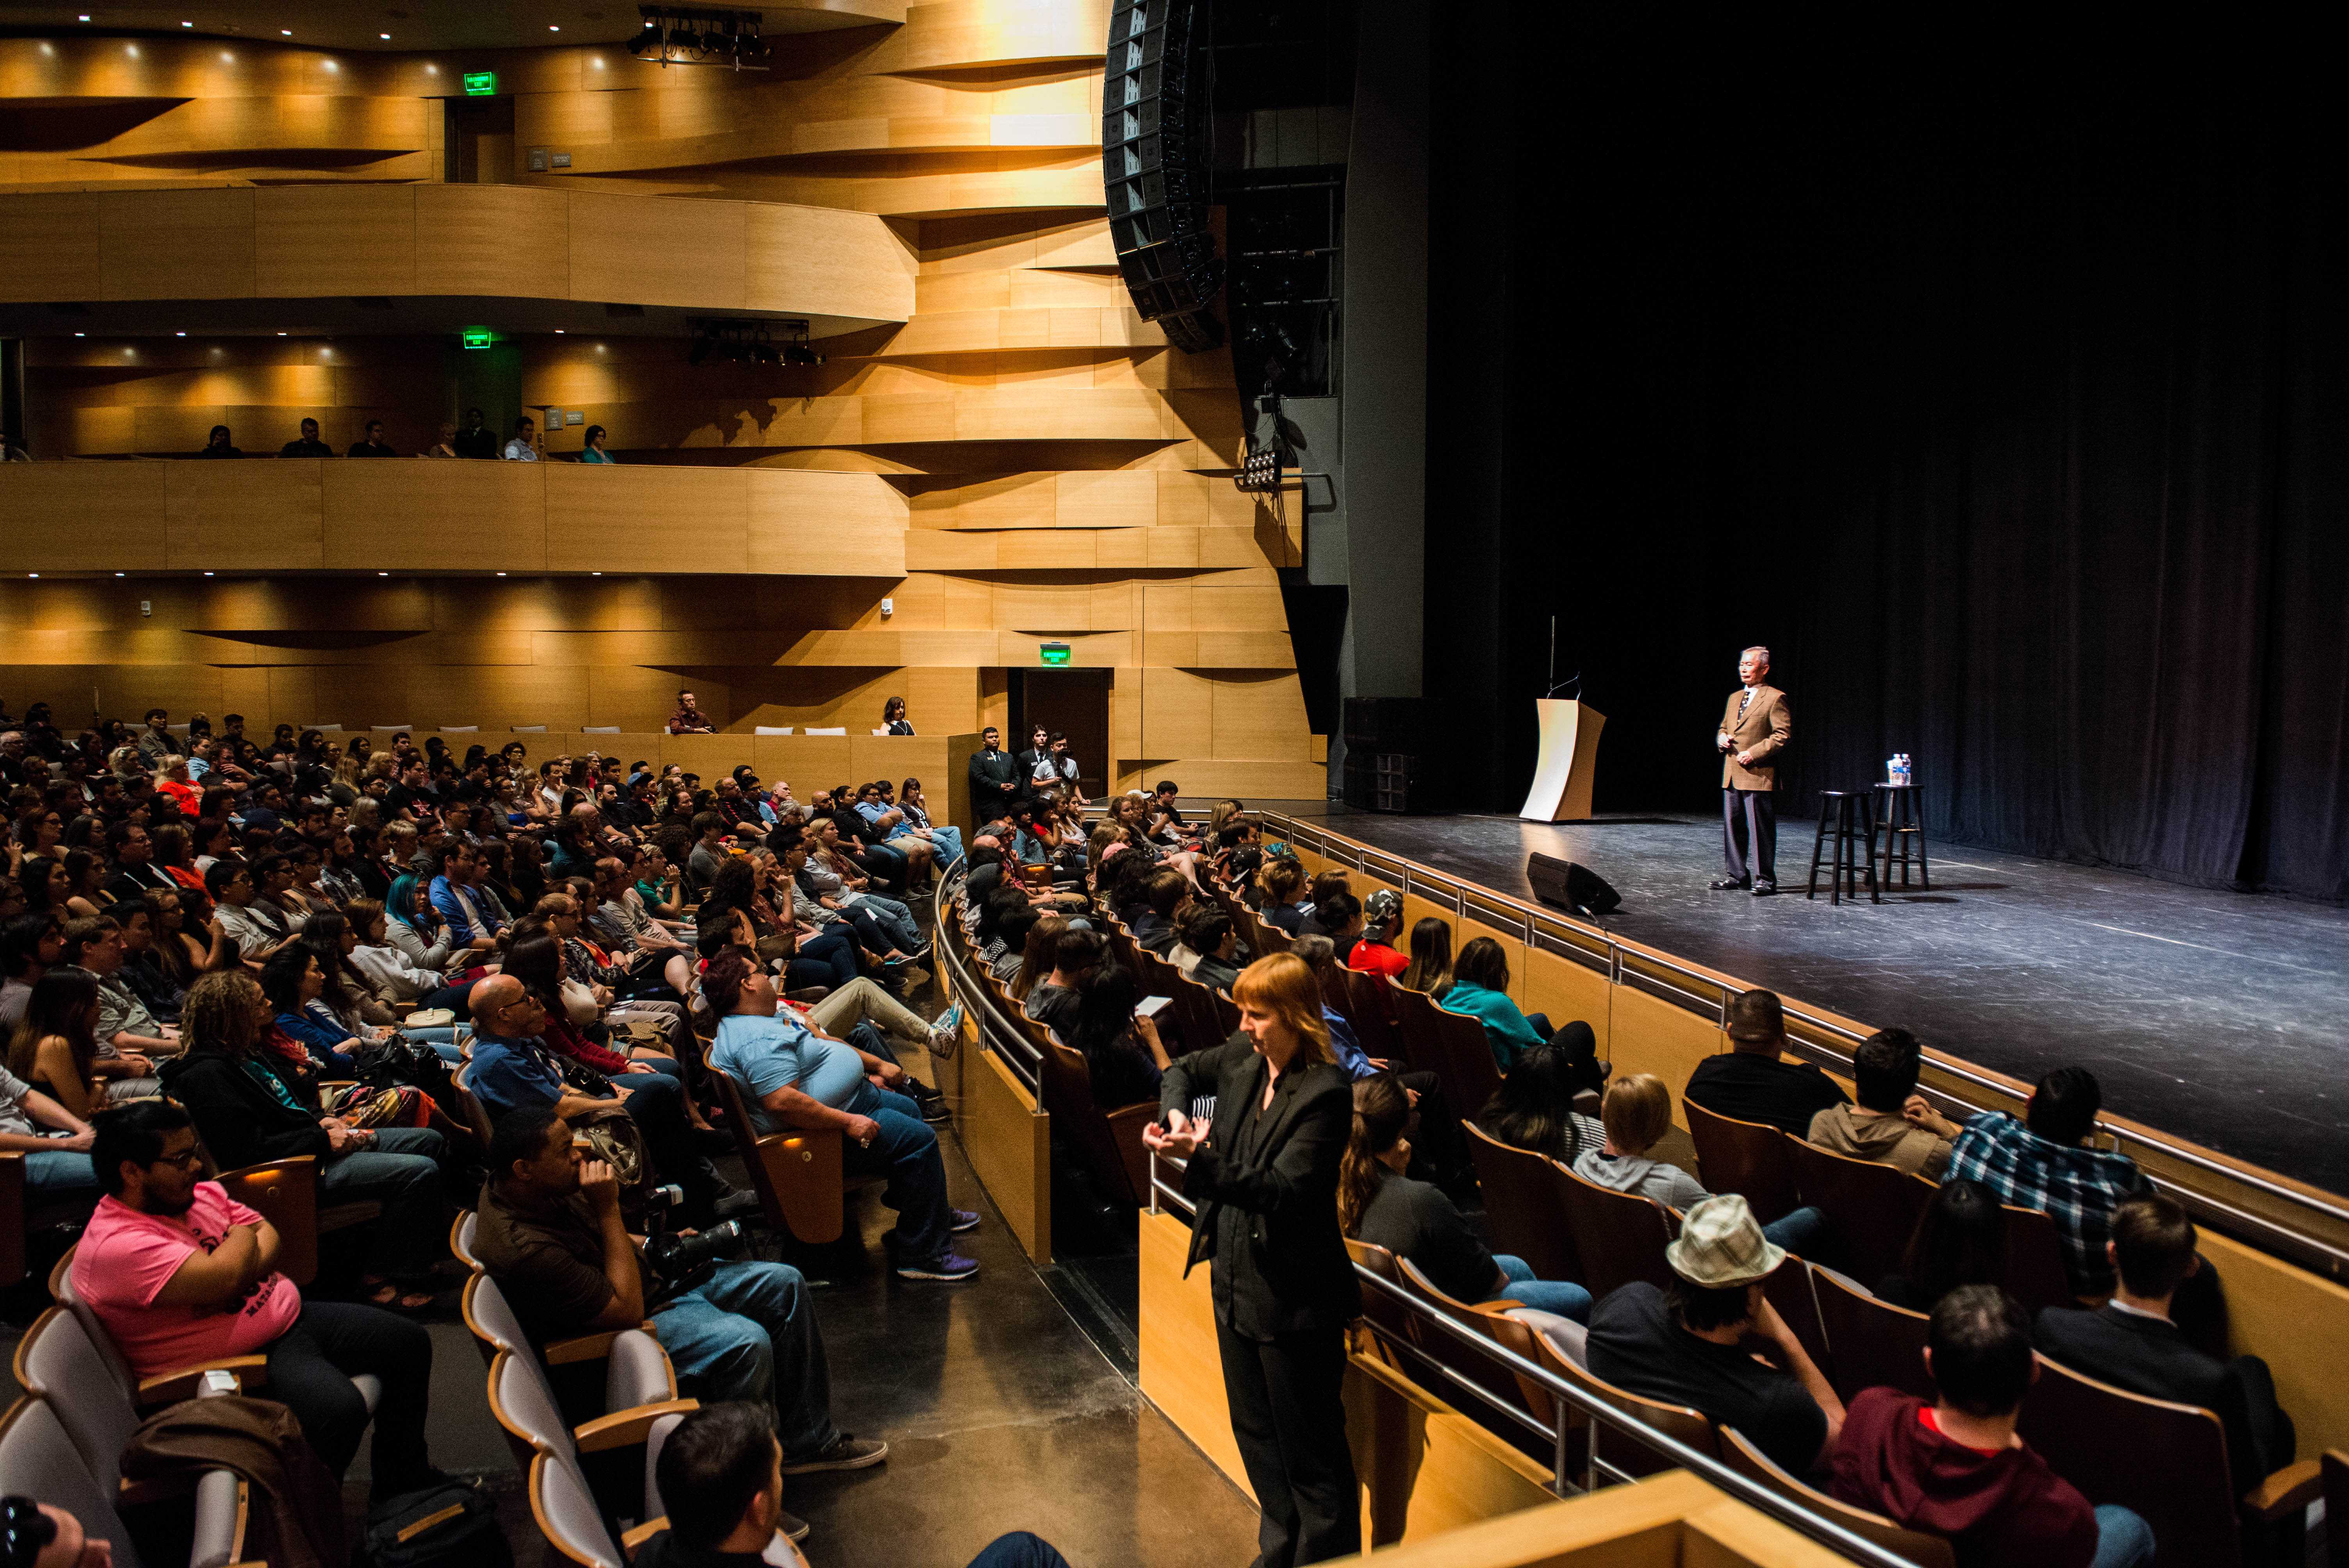 George Takei is shown on the stage with an audience of students